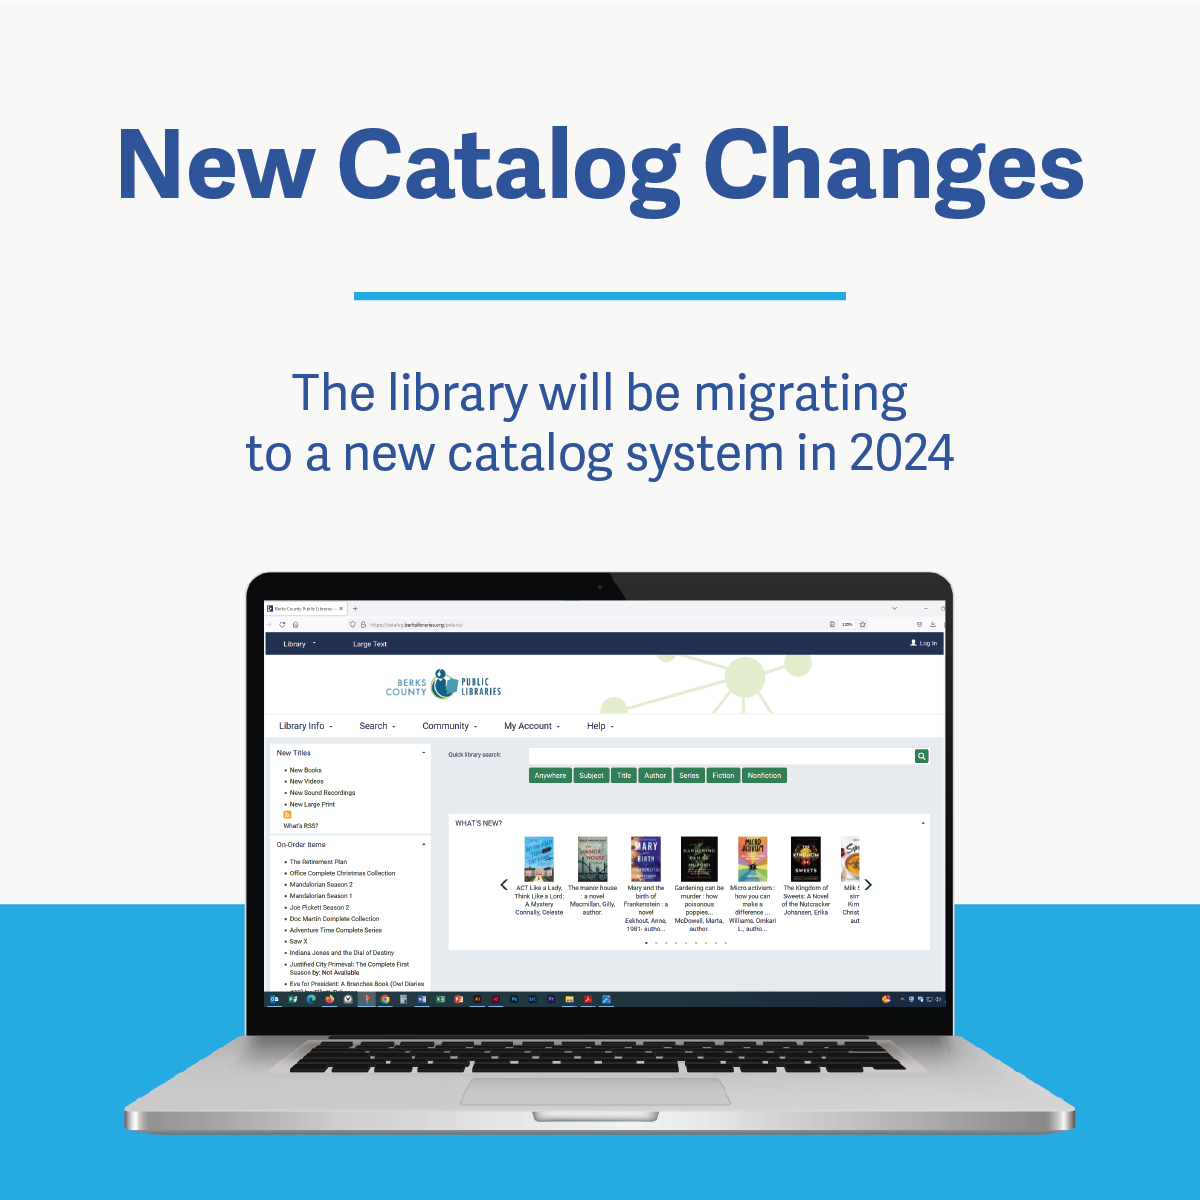 Laptop screen showing the online library catalog. Text reads: "New Catalog Changes. The Library will be migrating to a new catalog system in 2024."